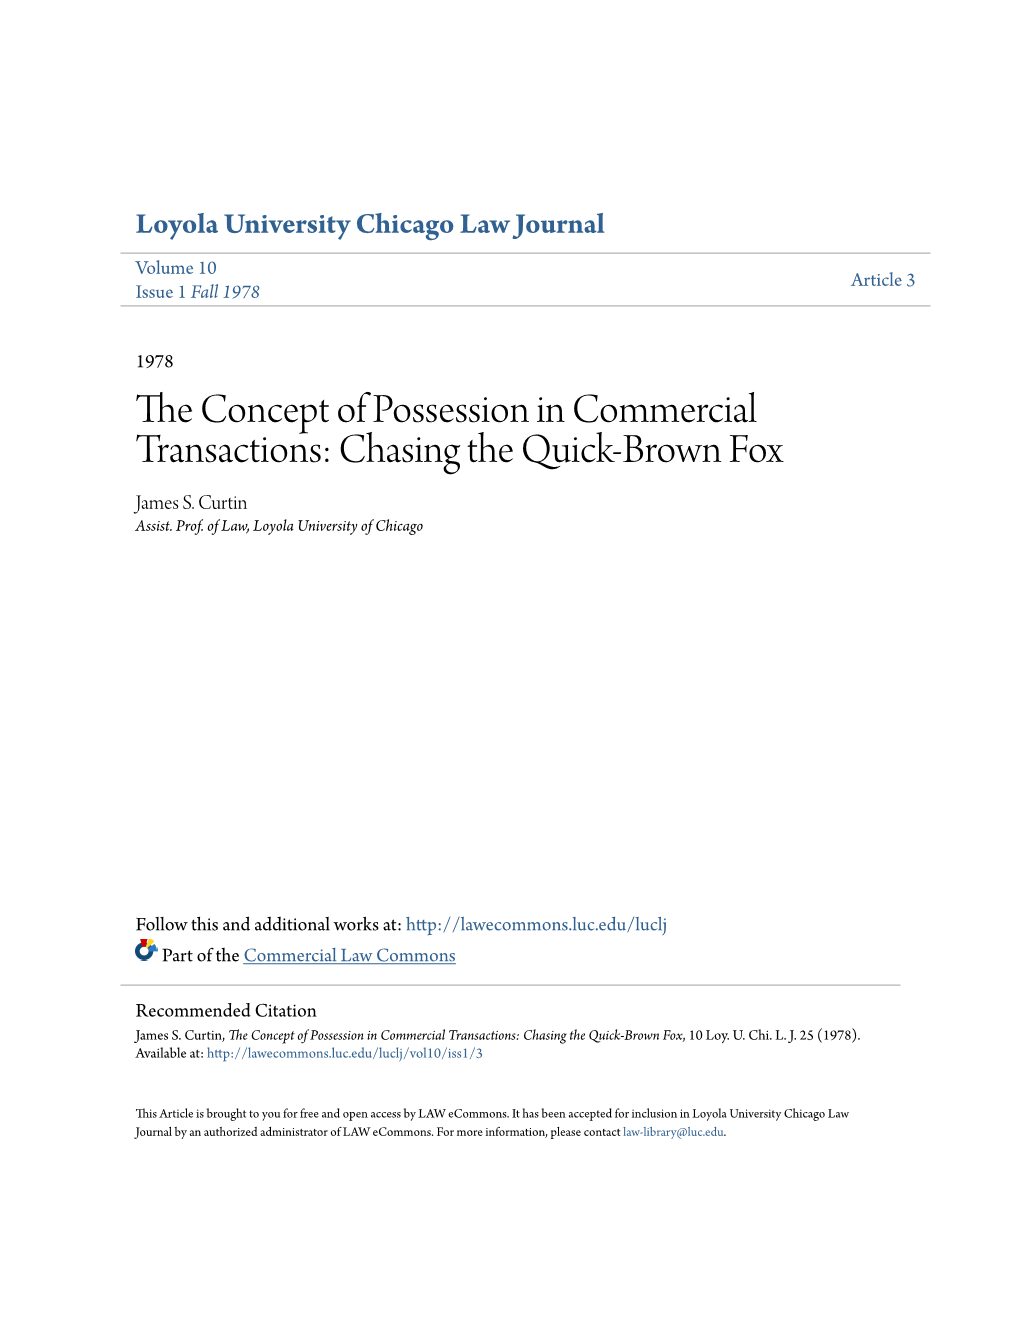 The Concept of Possession in Commercial Transactions: Chasing the Quick-Brown Fox, 10 Loy